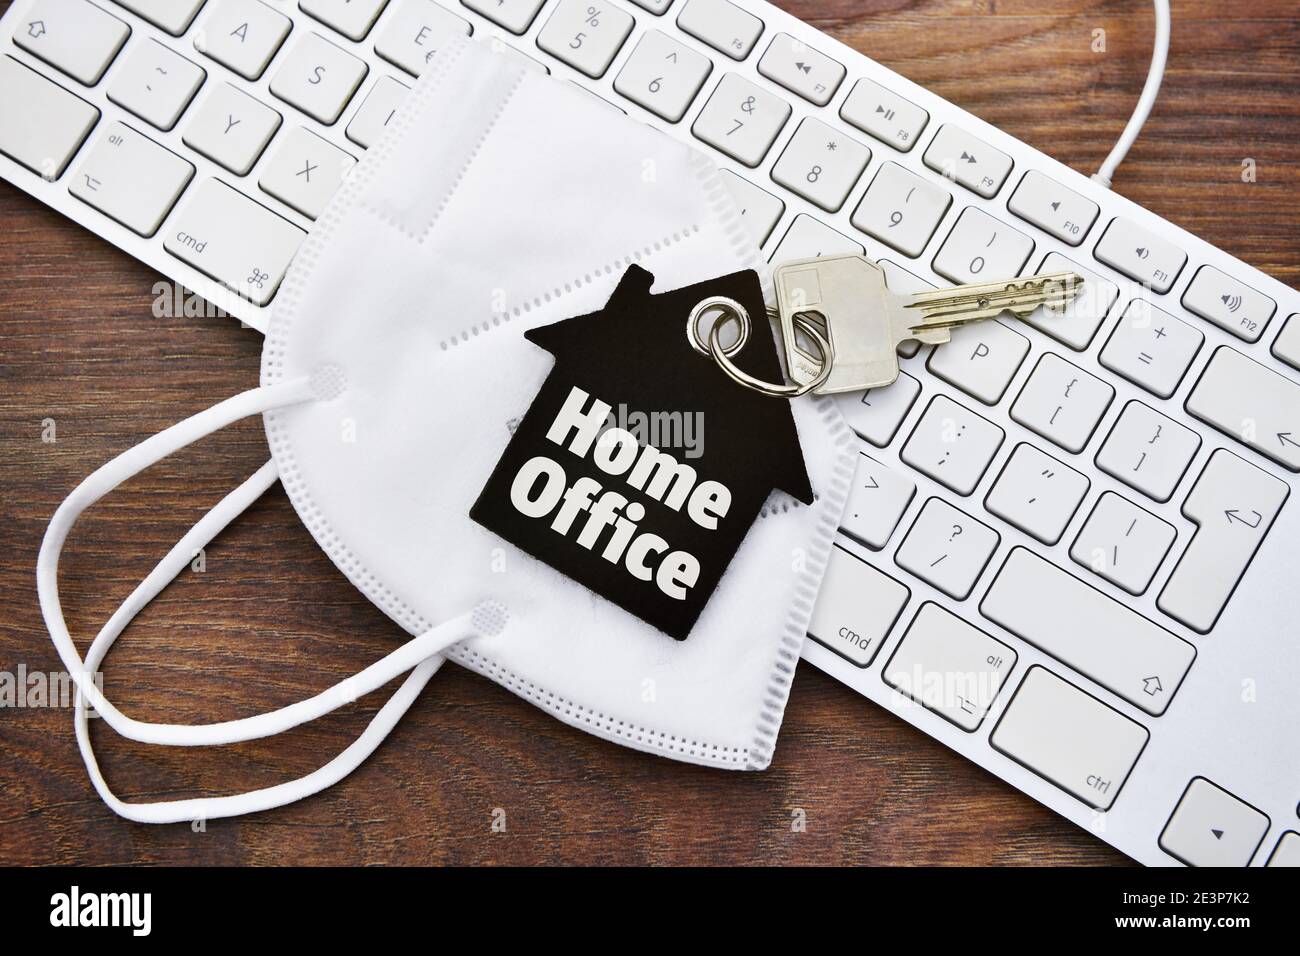 Home office key ring, face mask and computer keyboard Stock Photo